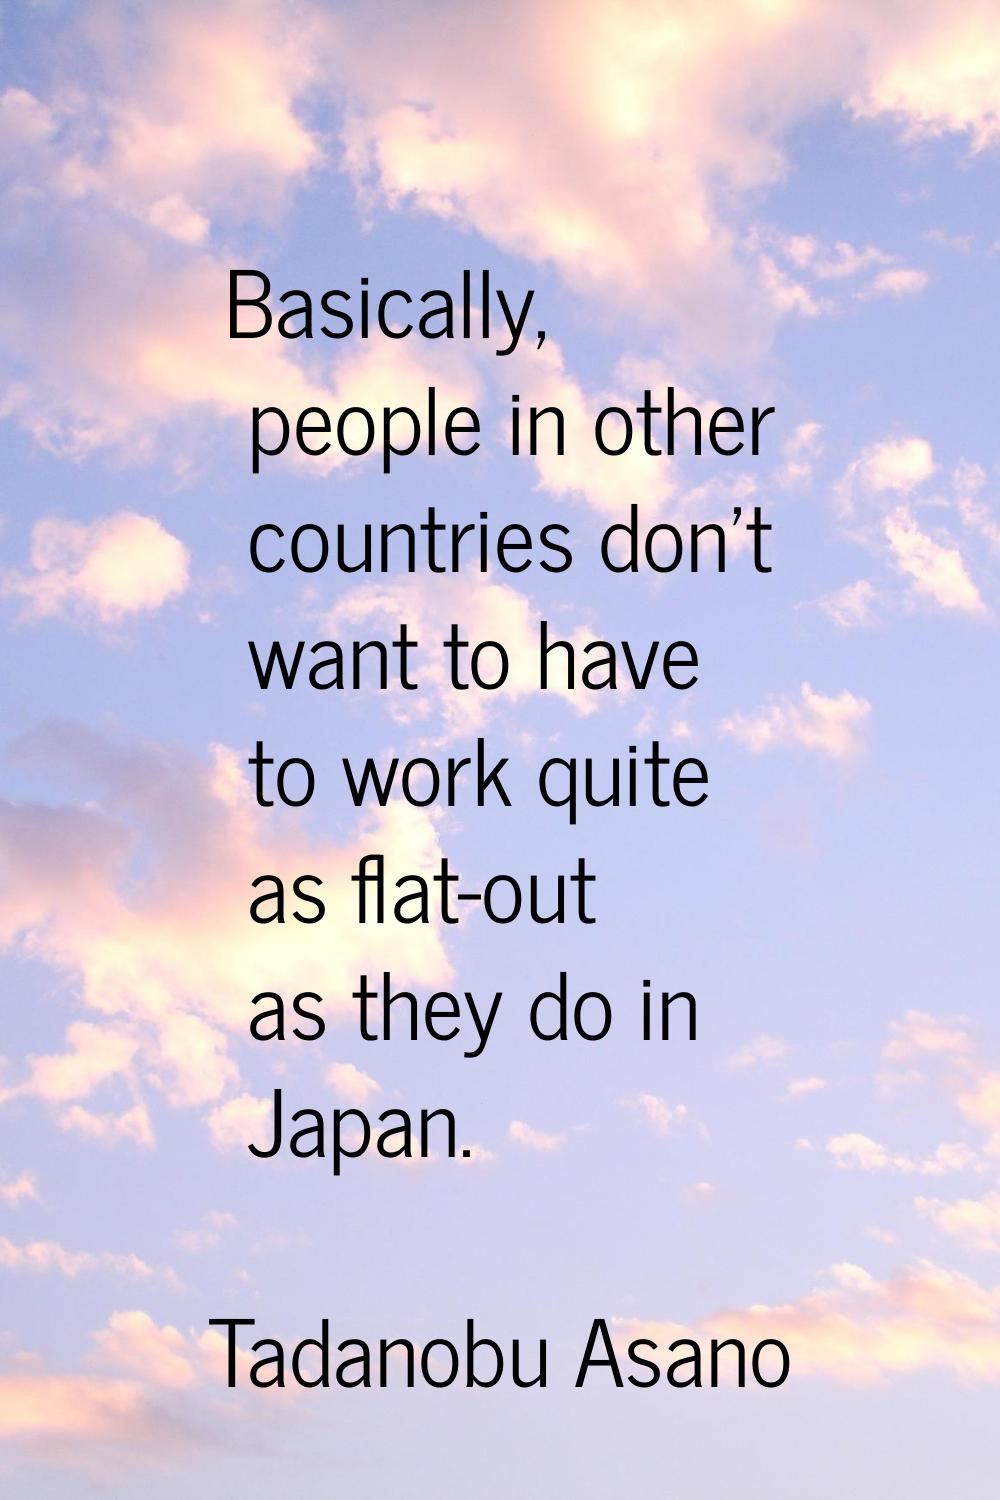 Basically, people in other countries don't want to have to work quite as flat-out as they do in Jap